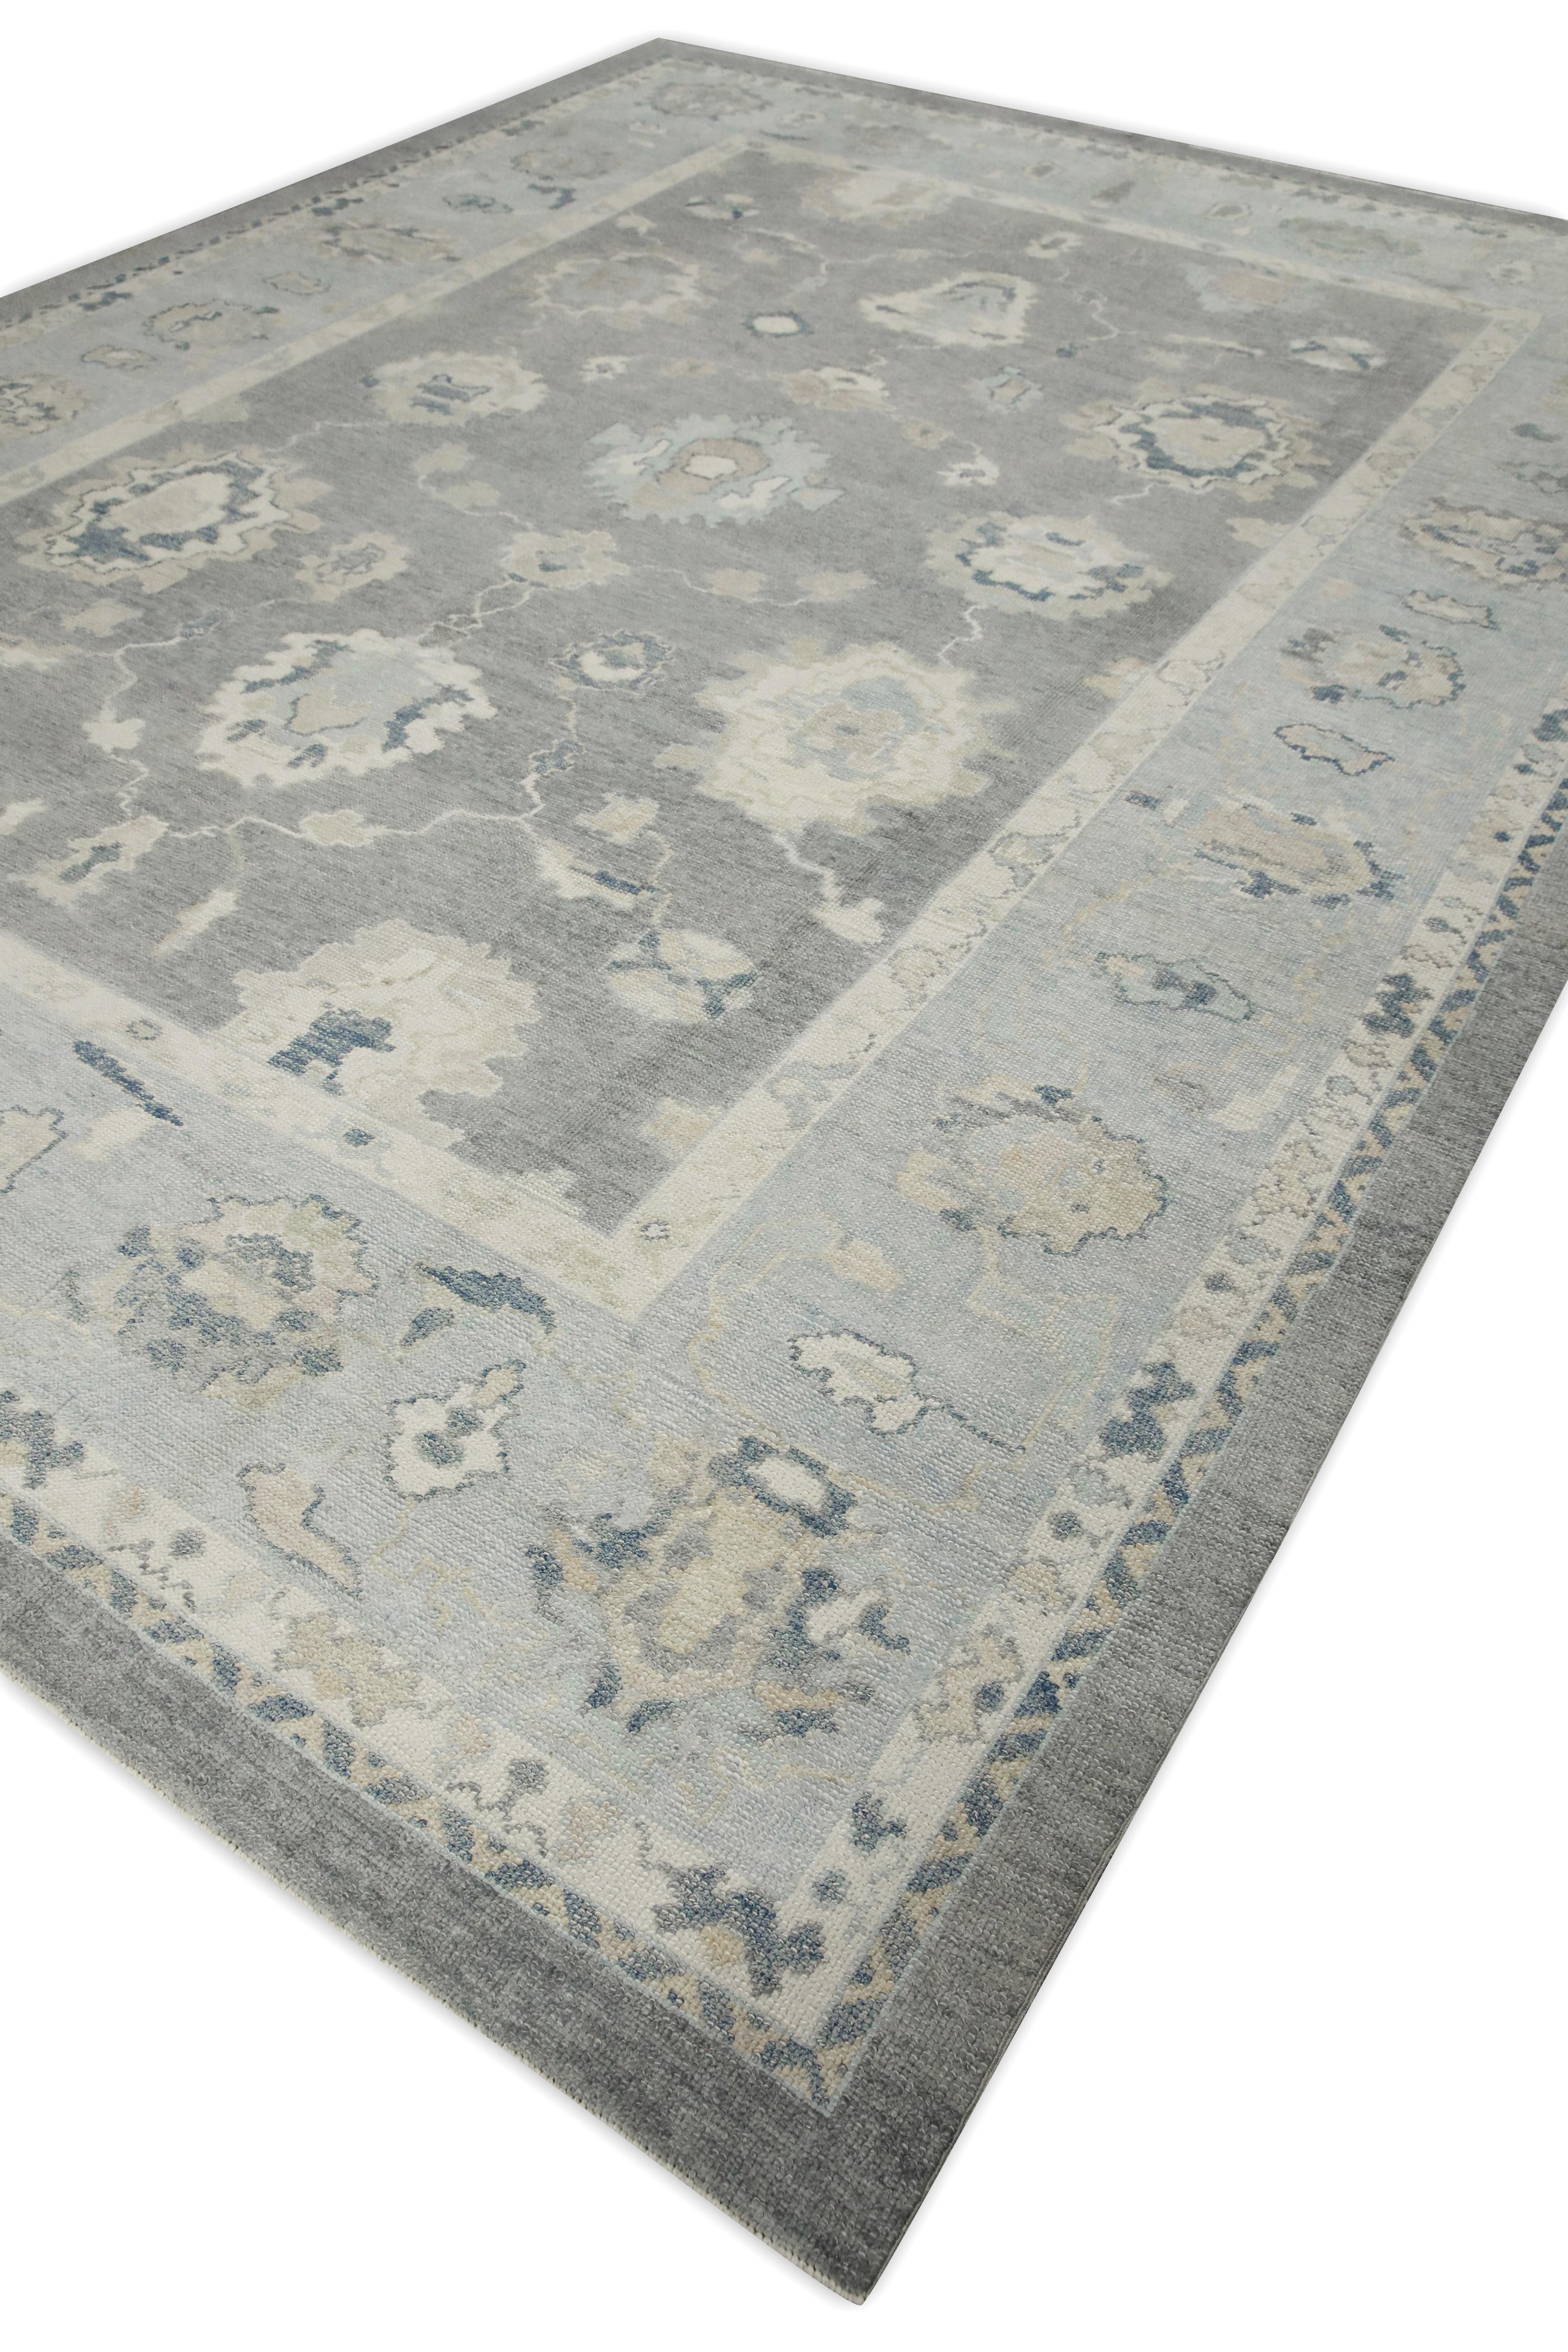 Contemporary Gray Floral Design Handwoven Wool Turkish Oushak Rug 10'2